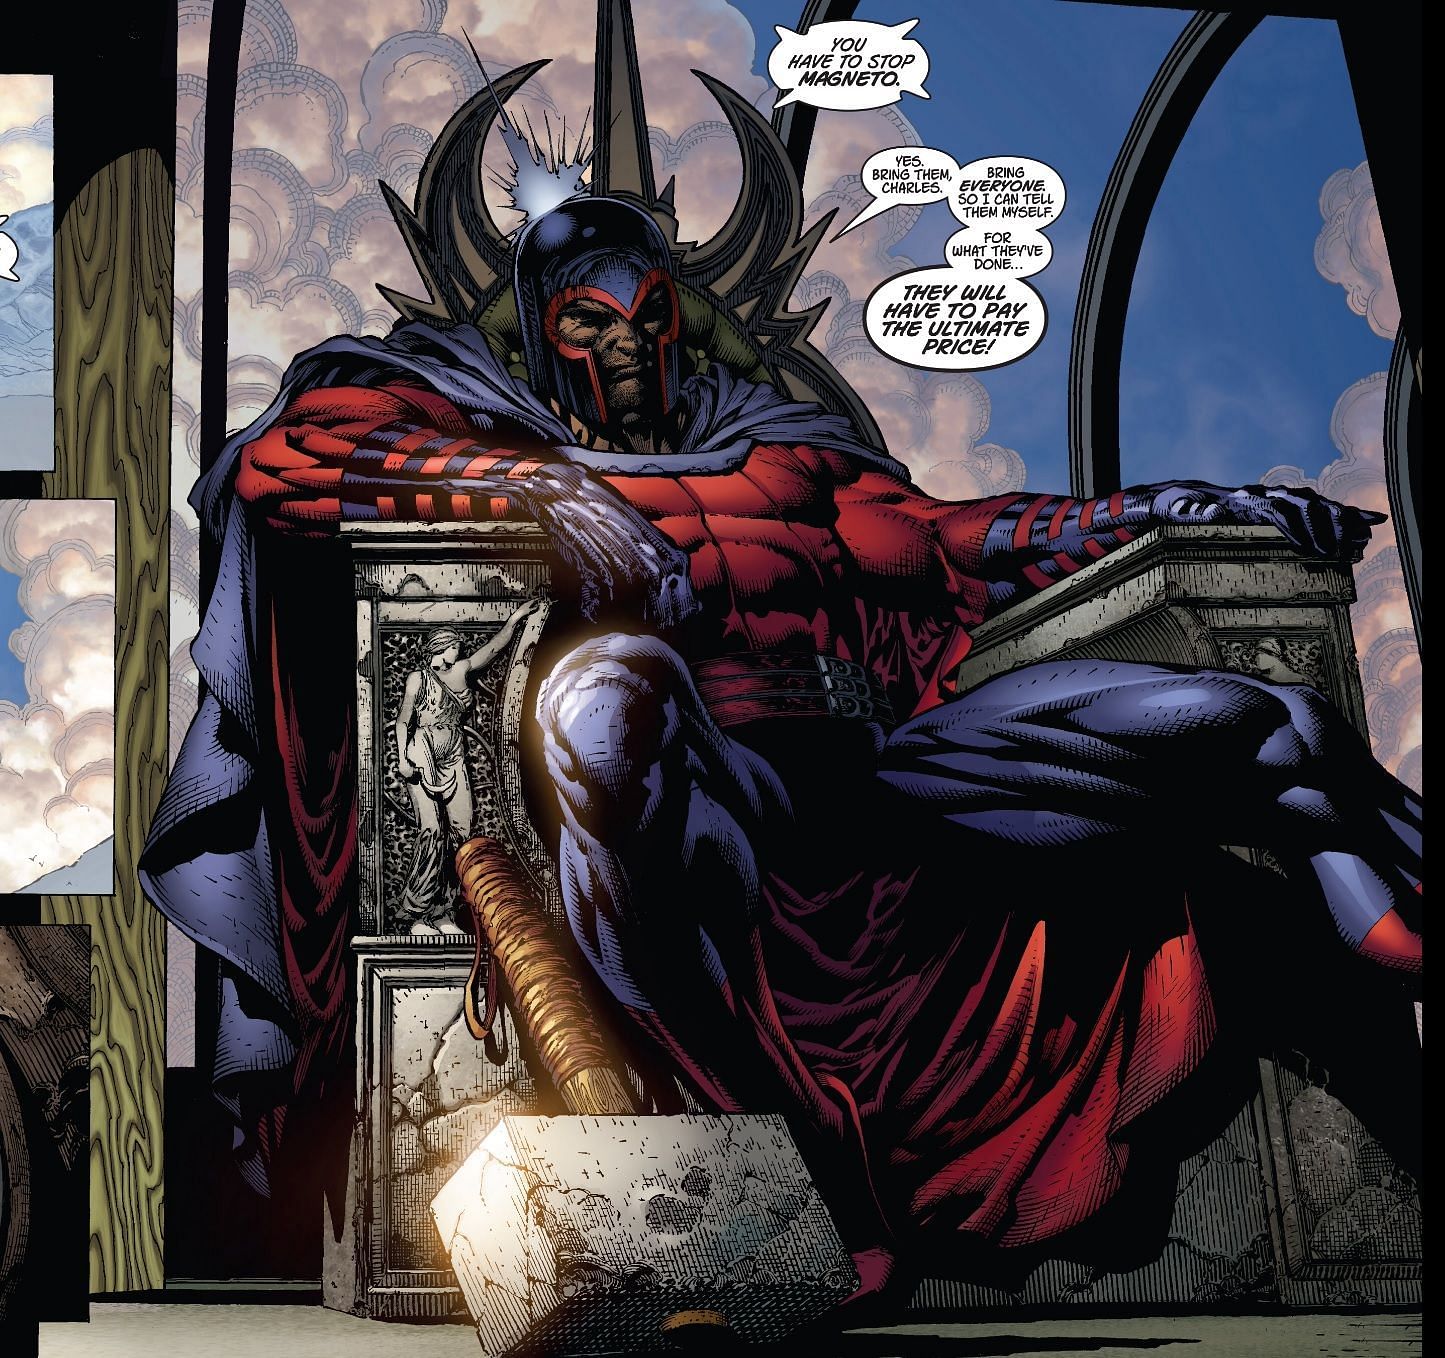 10 villains/anti-heroes able to up Thor's hammer